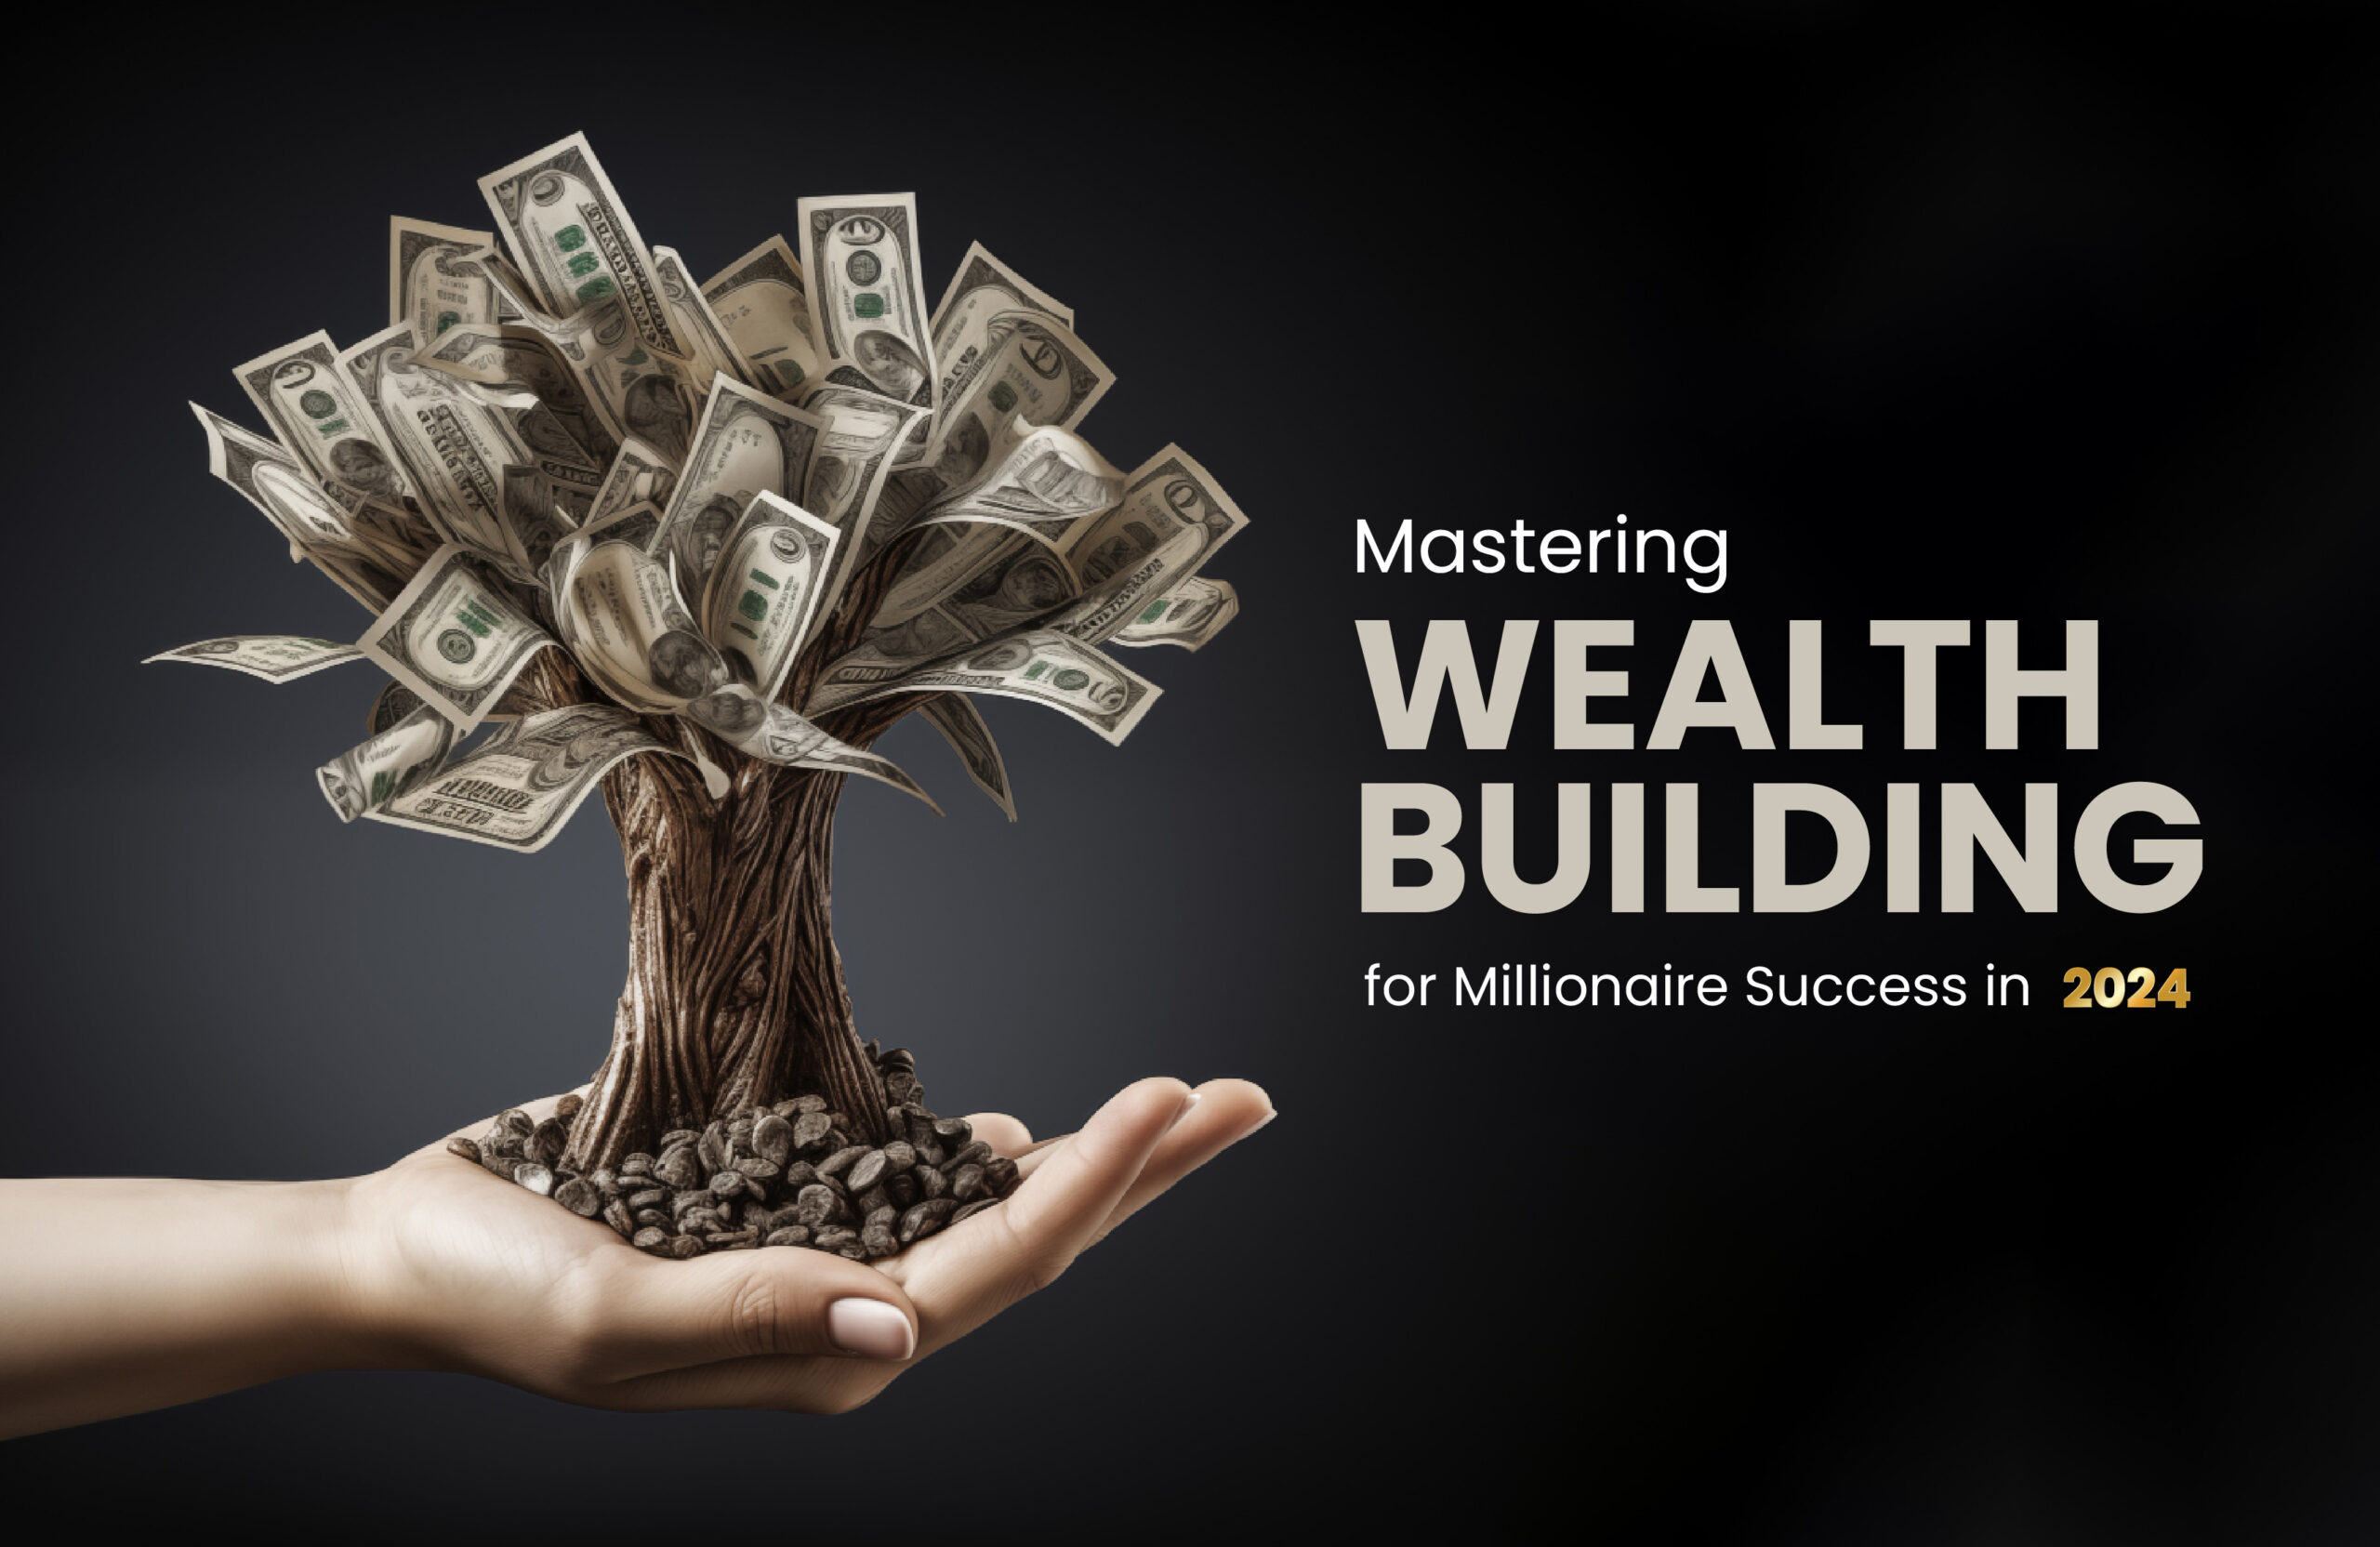 Mastering Wealth Building for Millionaire Success in 2024: Strategies, Trends, and Data